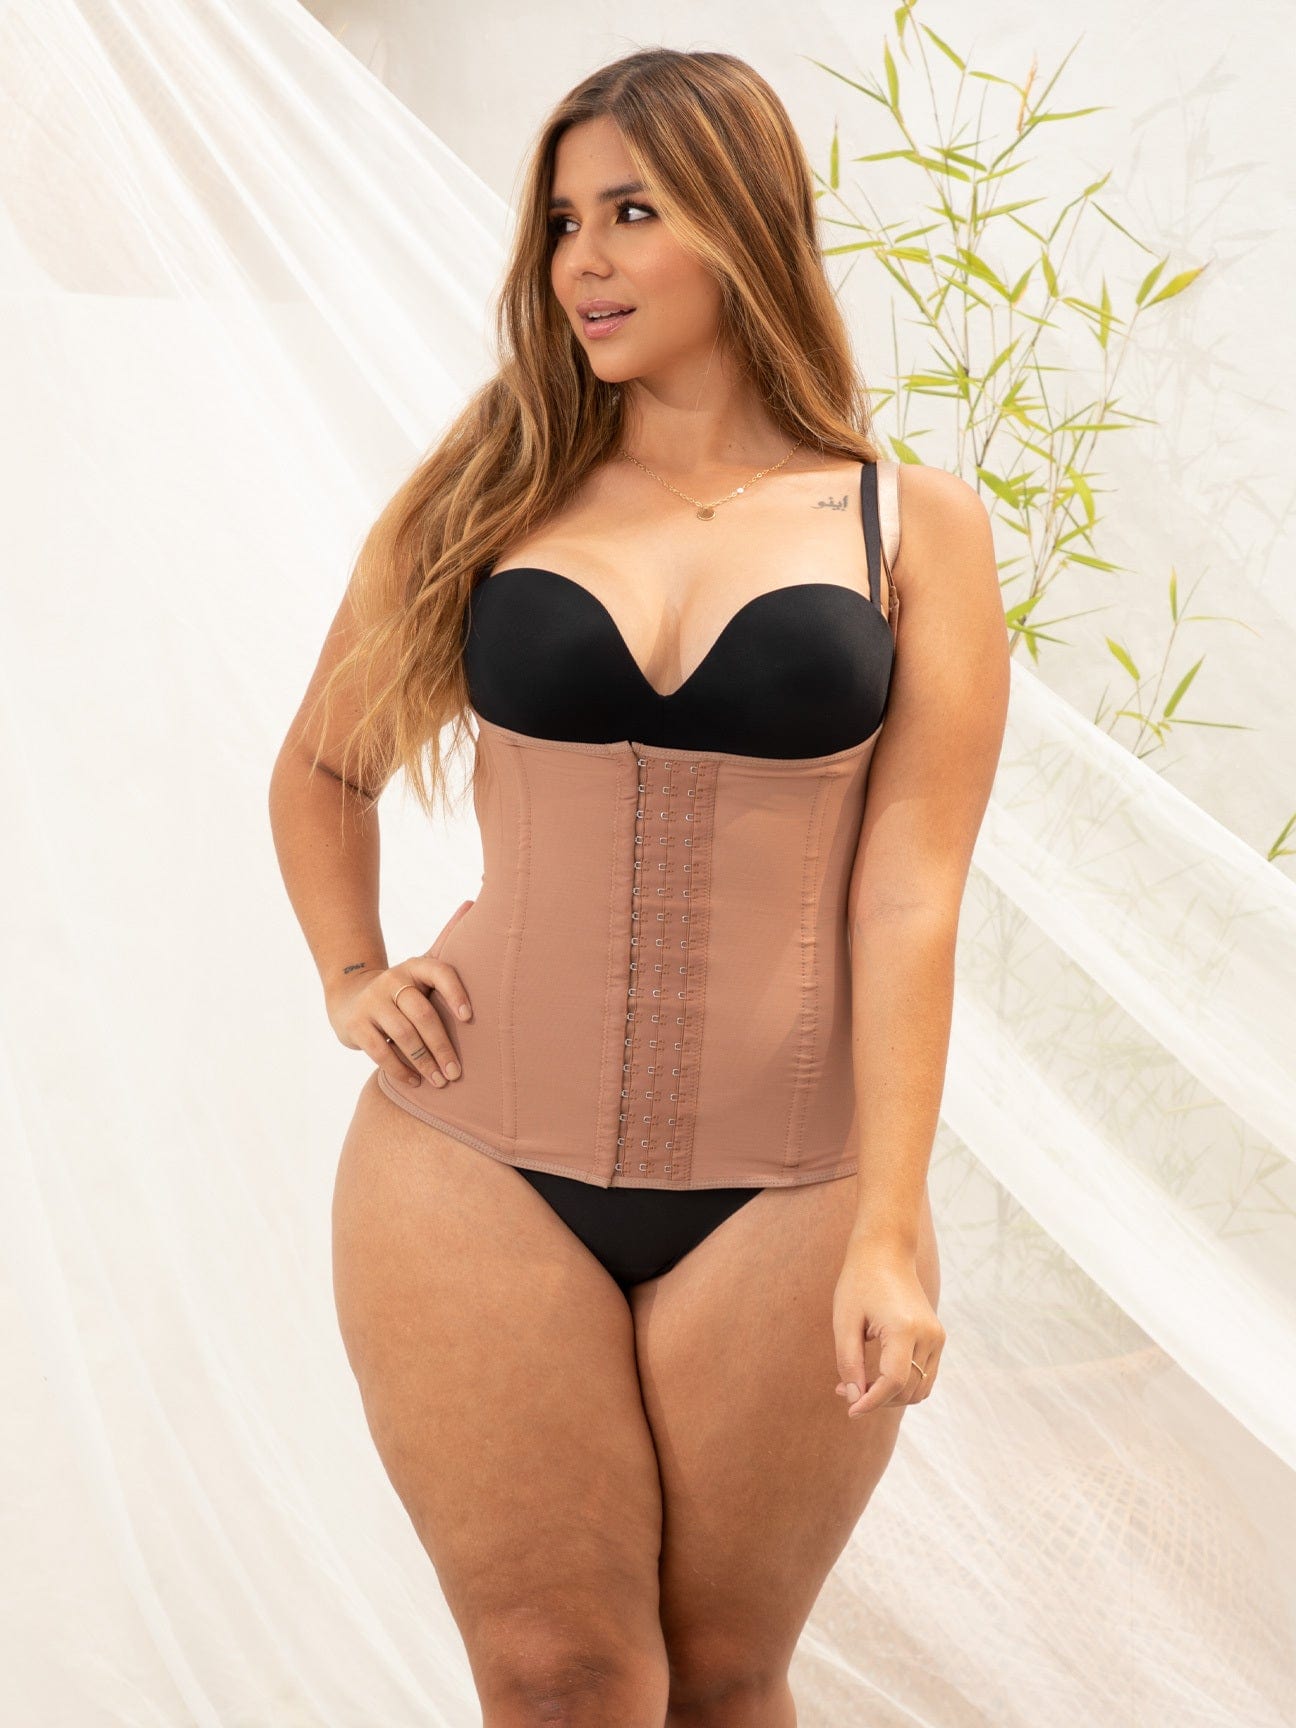 Plus sized model wearing a brown colored strapless shapewear.